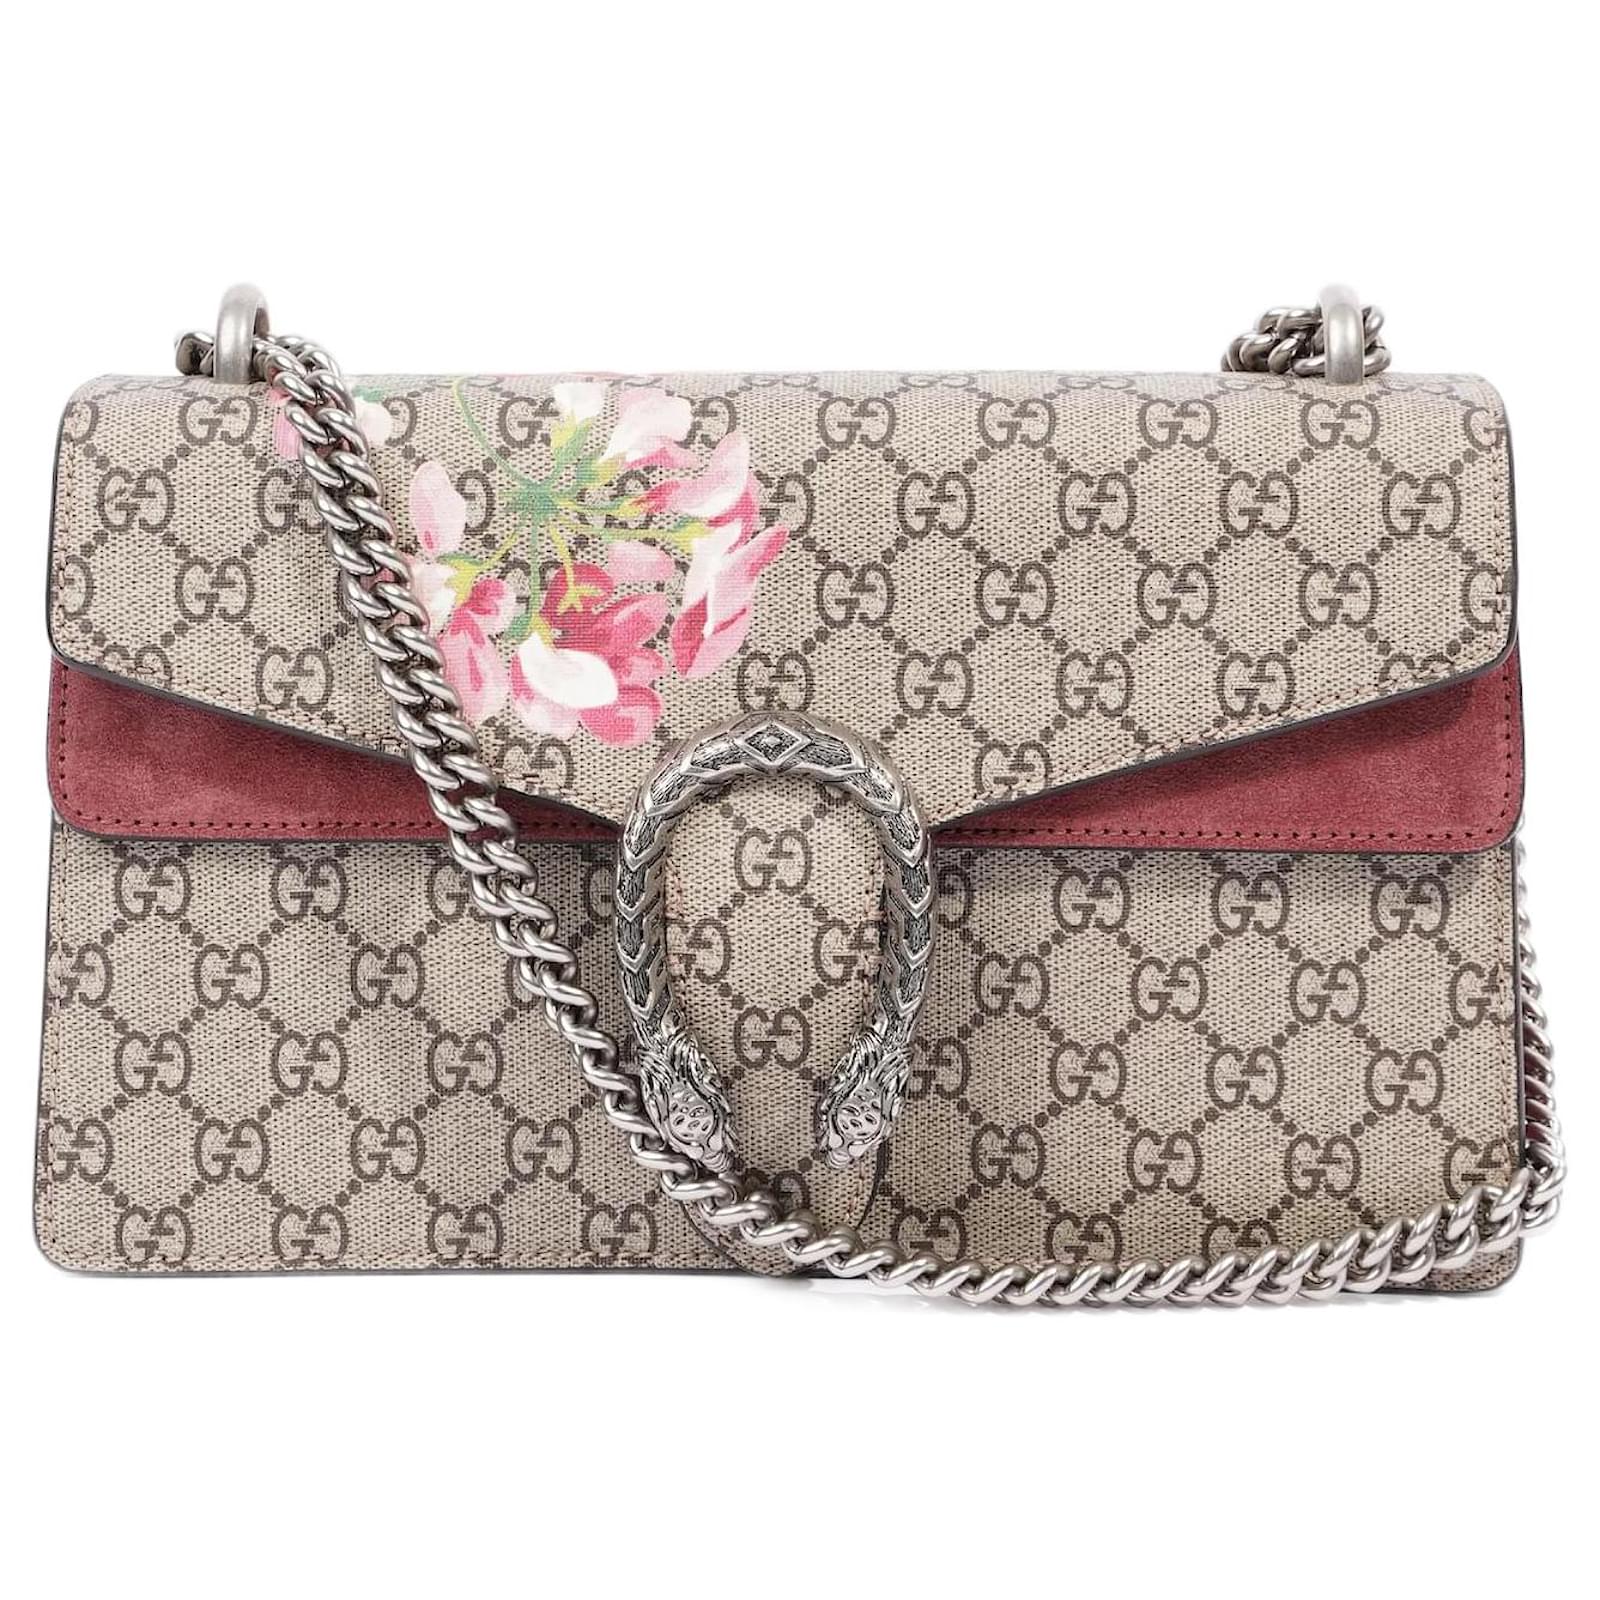 gucci dionysus small size